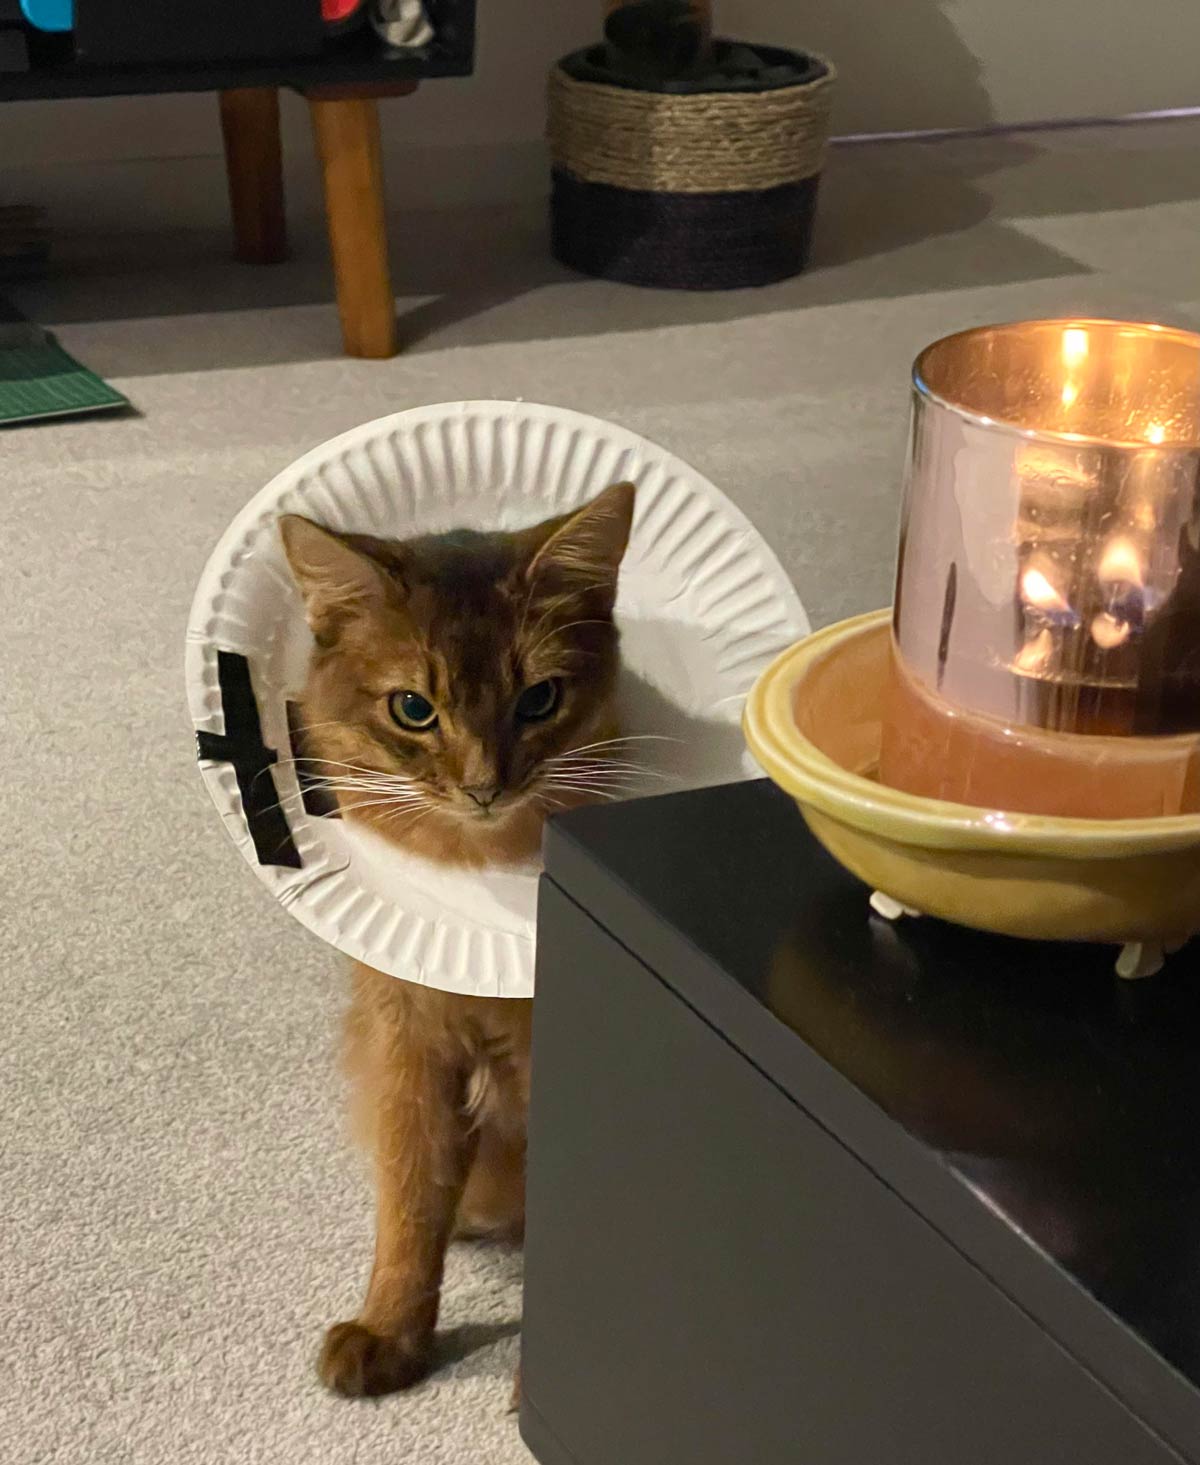 Someone is very angry that we had to put a makeshift cone on him for the night